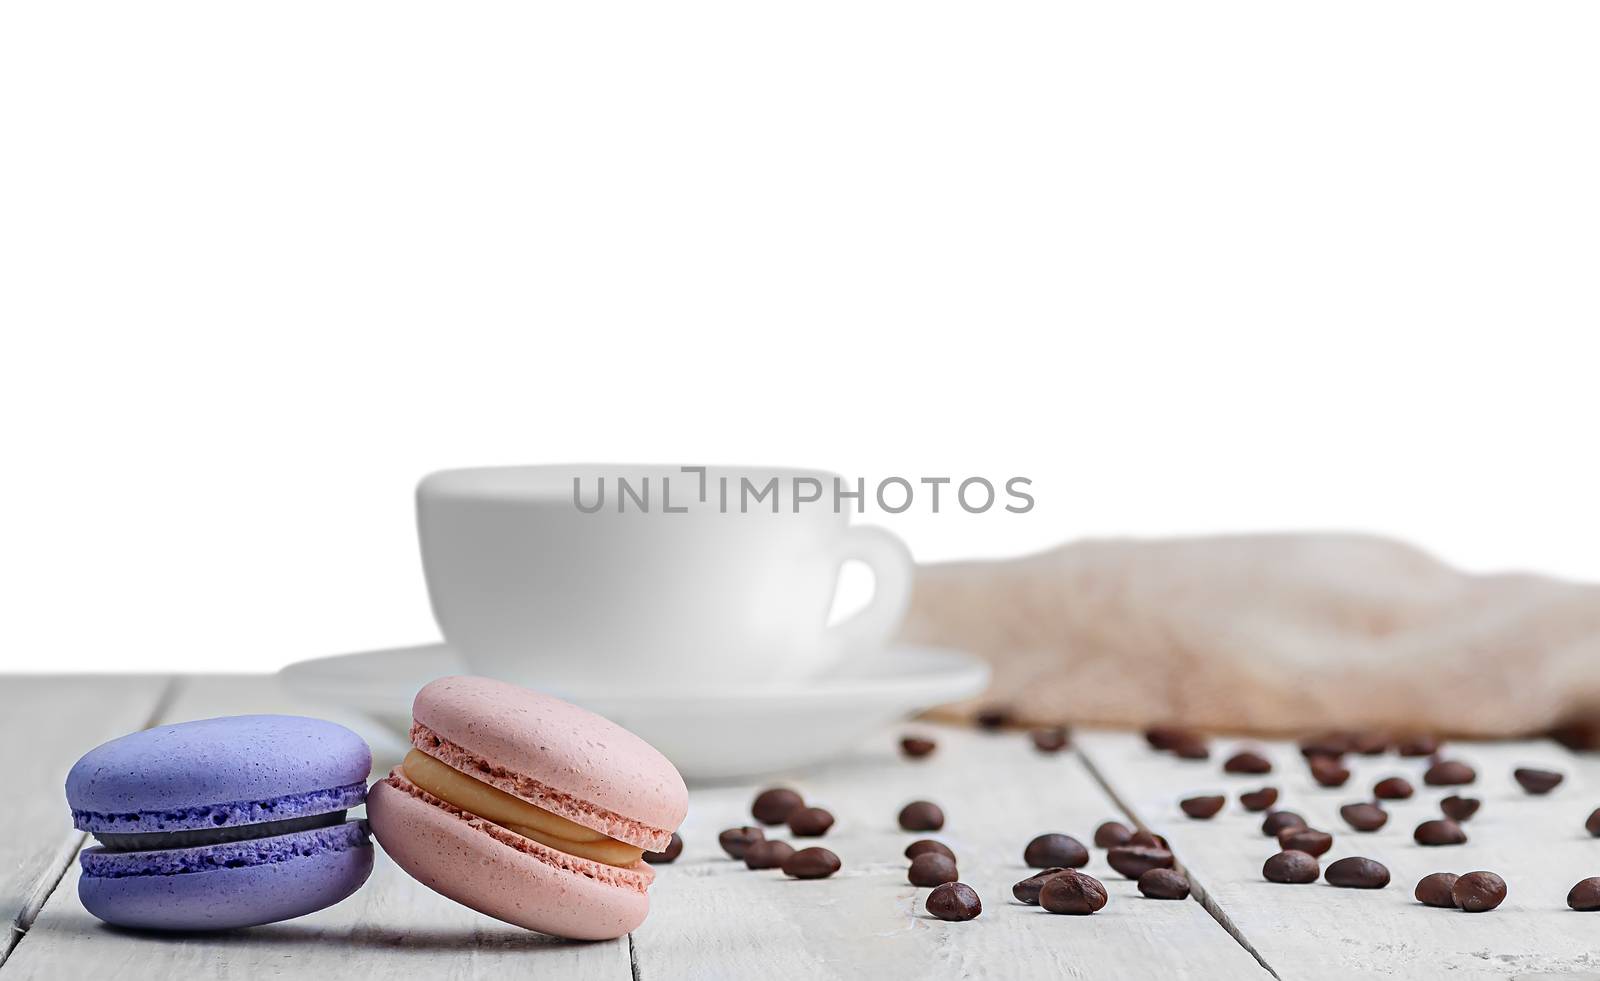 Two macaroons with a cup, coffee beans and towel isolated on white background